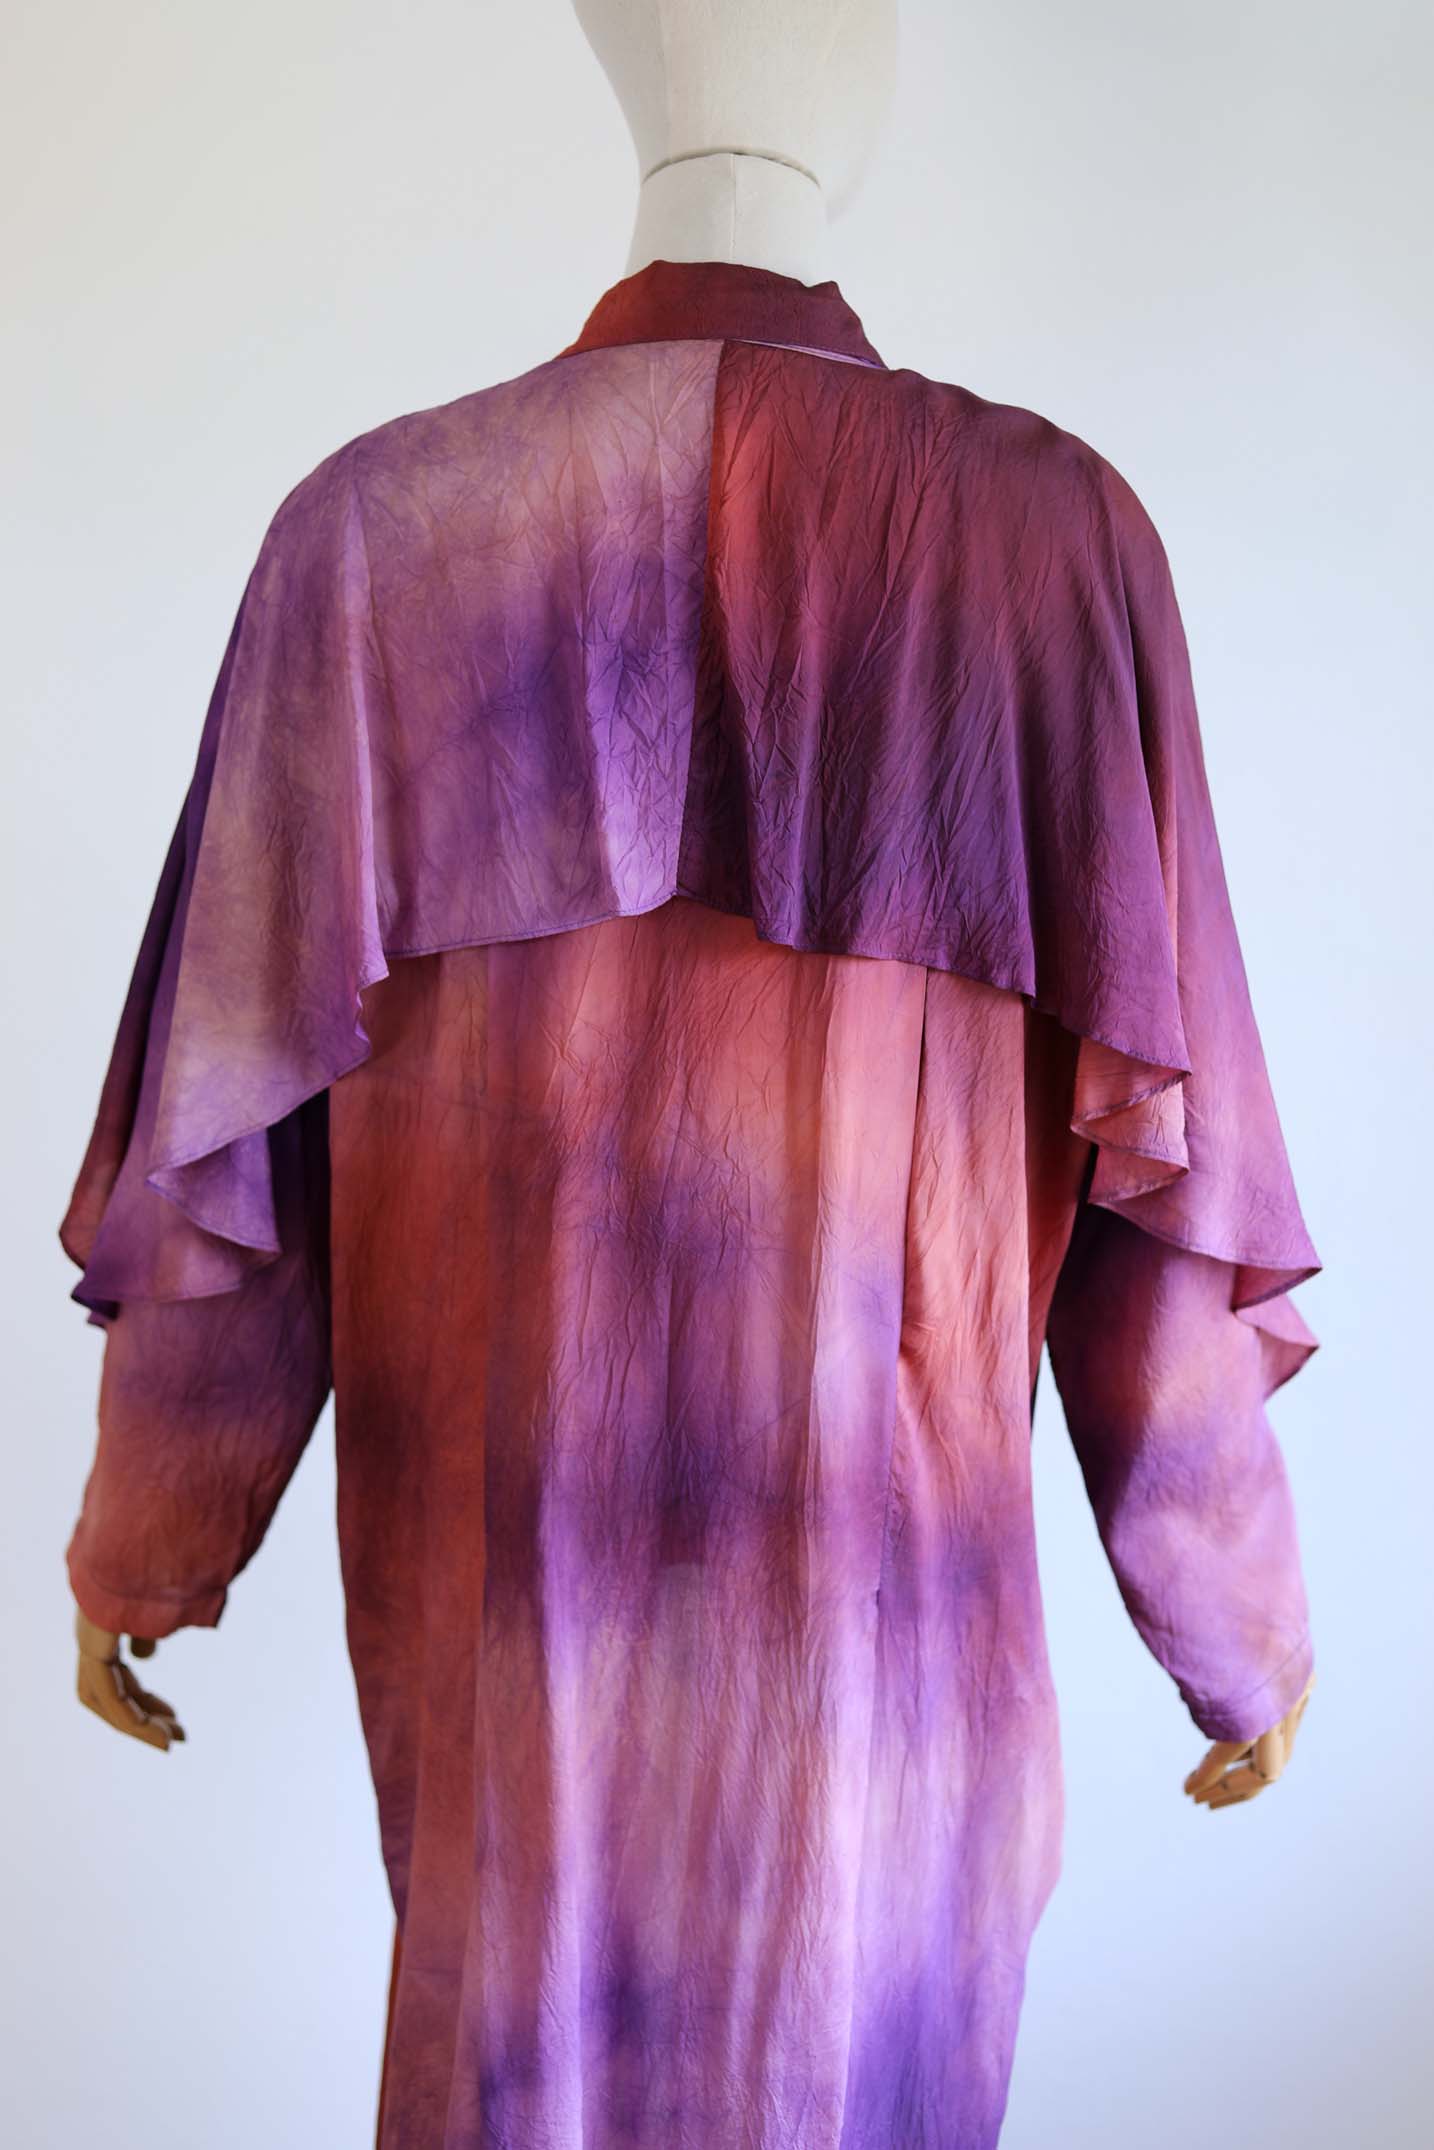 Vintage 1980s Jacket - Wizard-worthy! Purple + Copper Ombre Tie-Dyed Crinkle Rayon Flowy Duster w Big Shoulders Fits Many